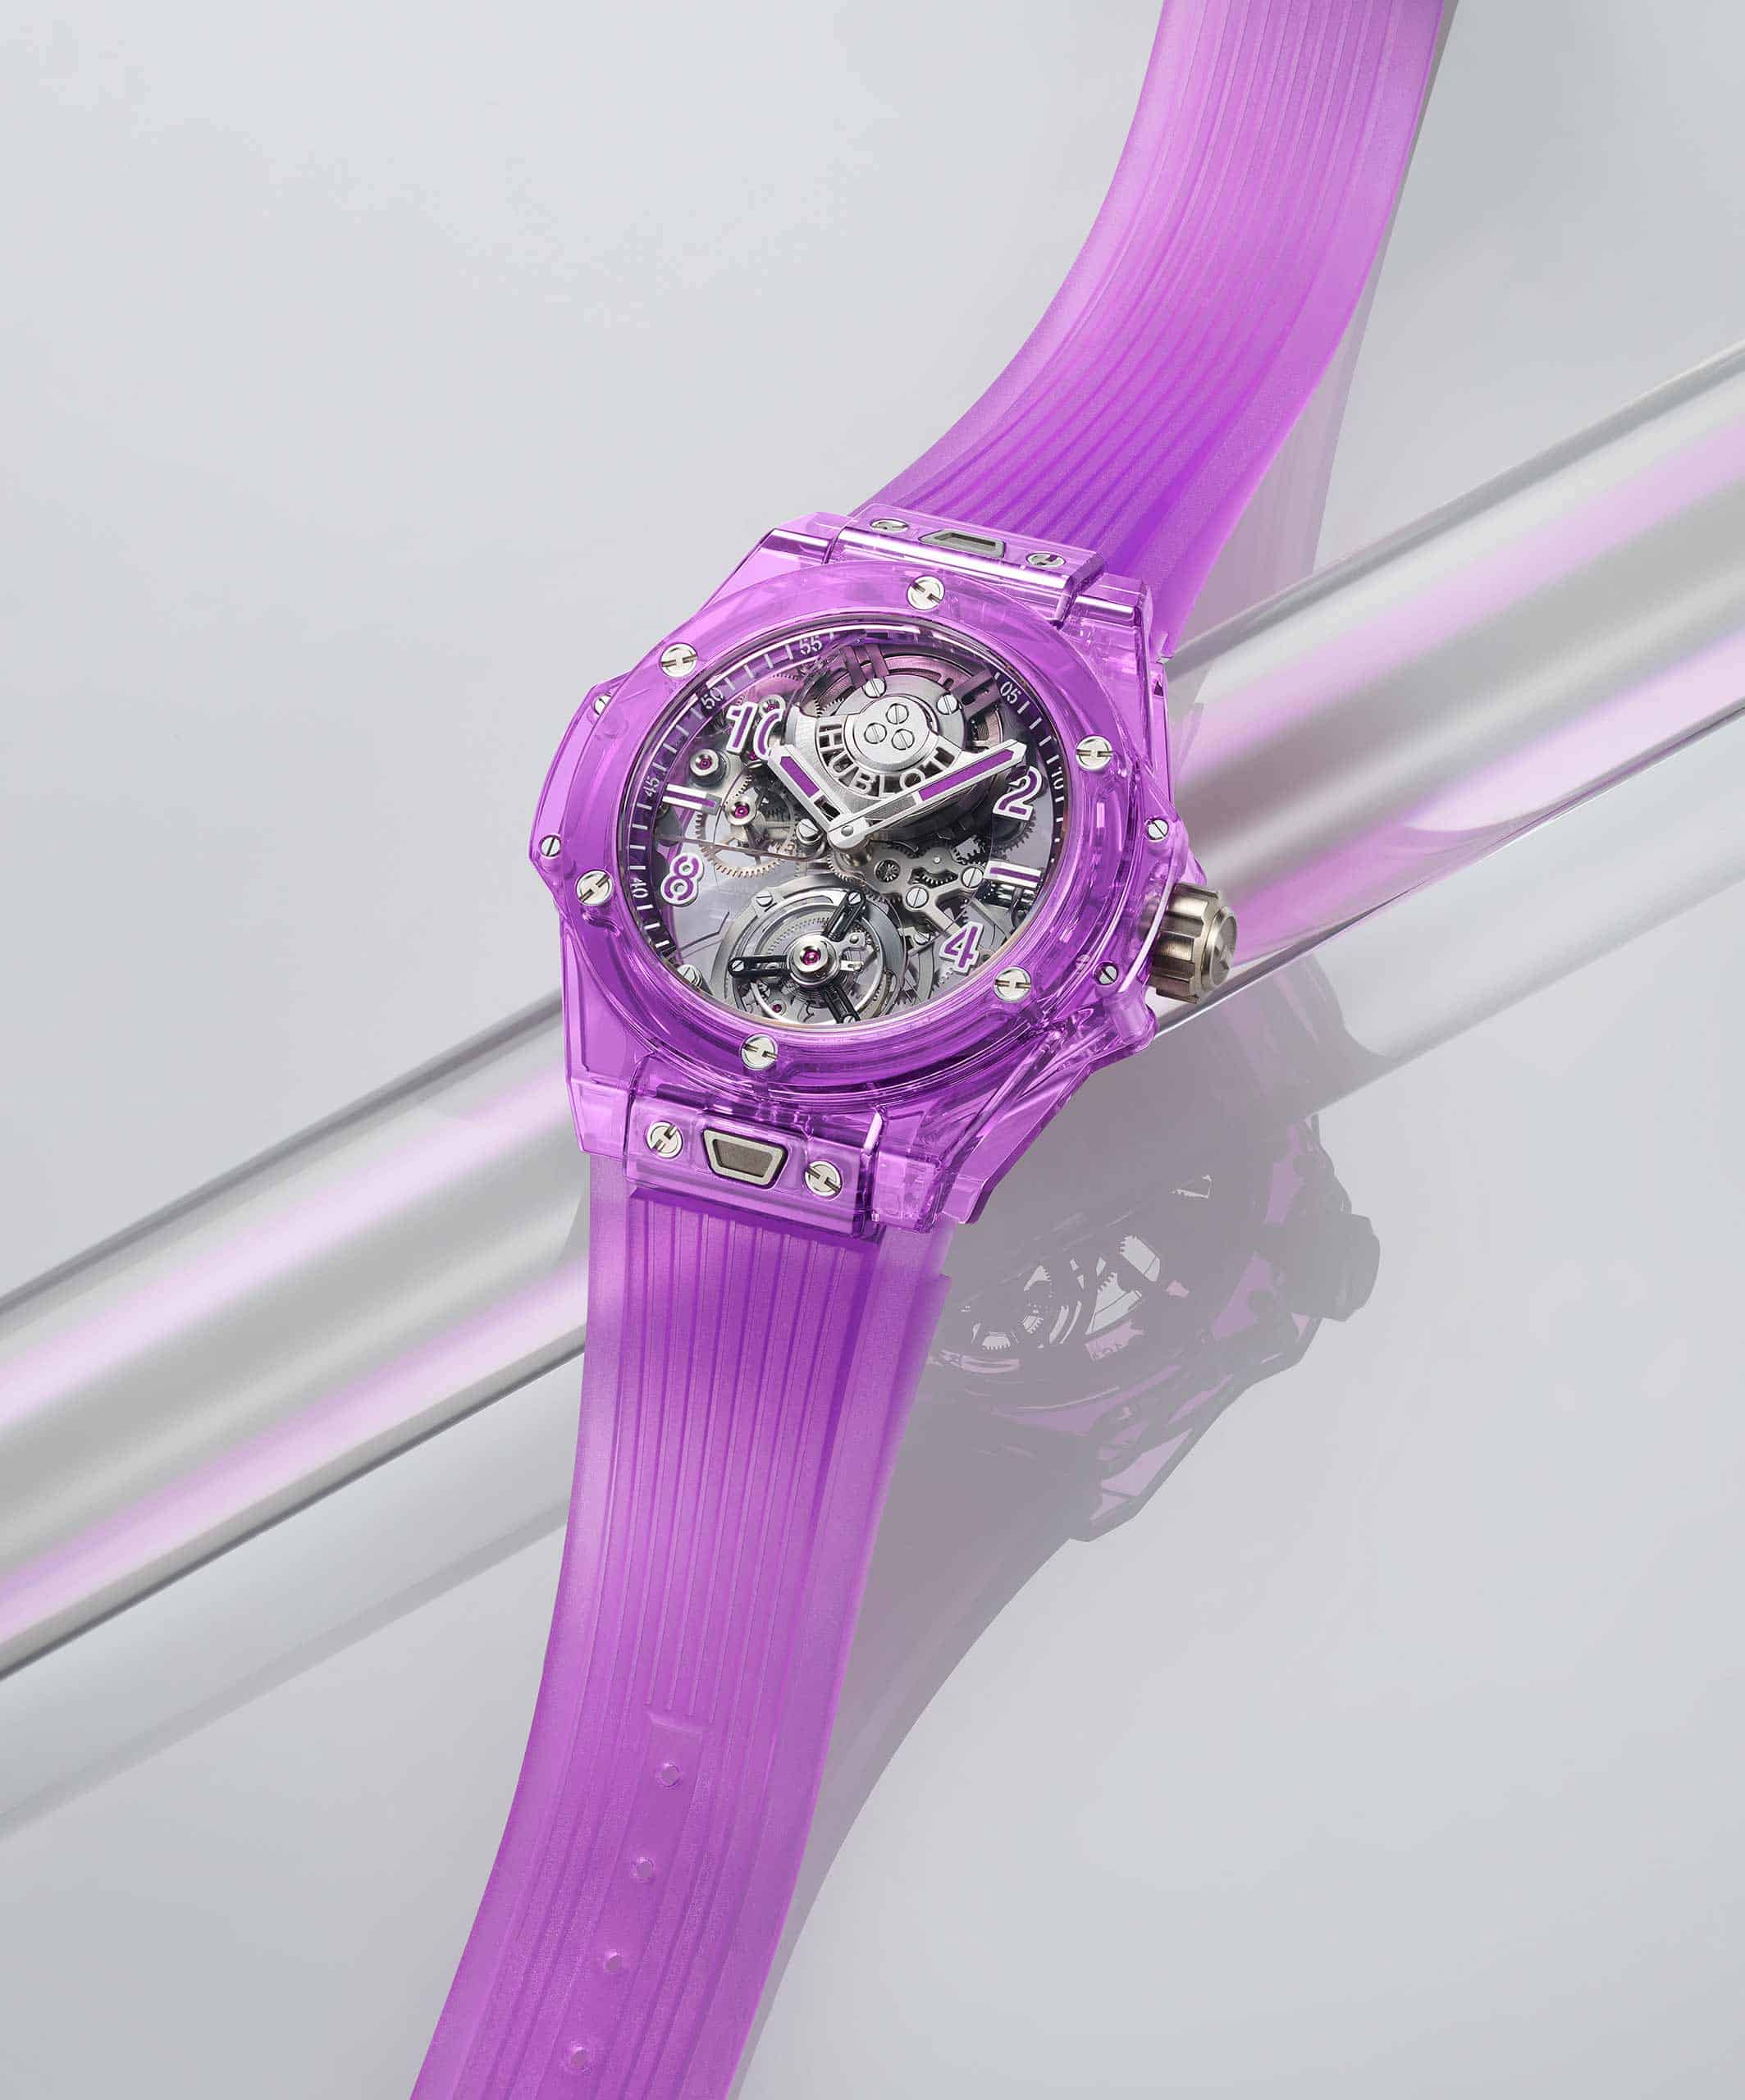 The Big Purple Hublot Was One of My Favorite New Releases at Watches & Wonders